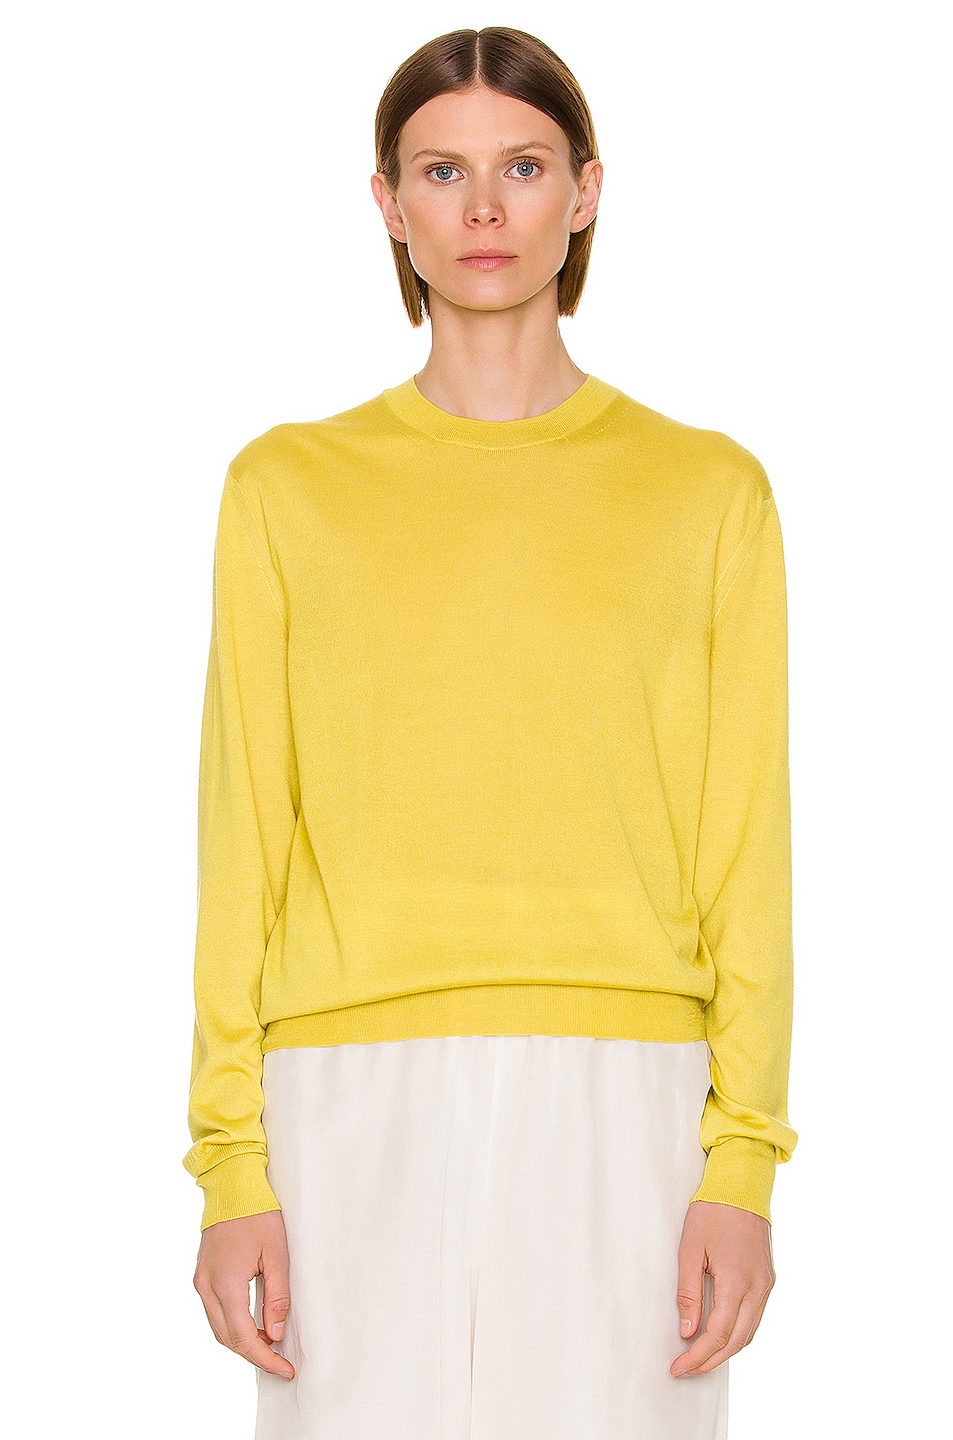 Image 1 of The Row Islington Top in Chartreuse Yellow